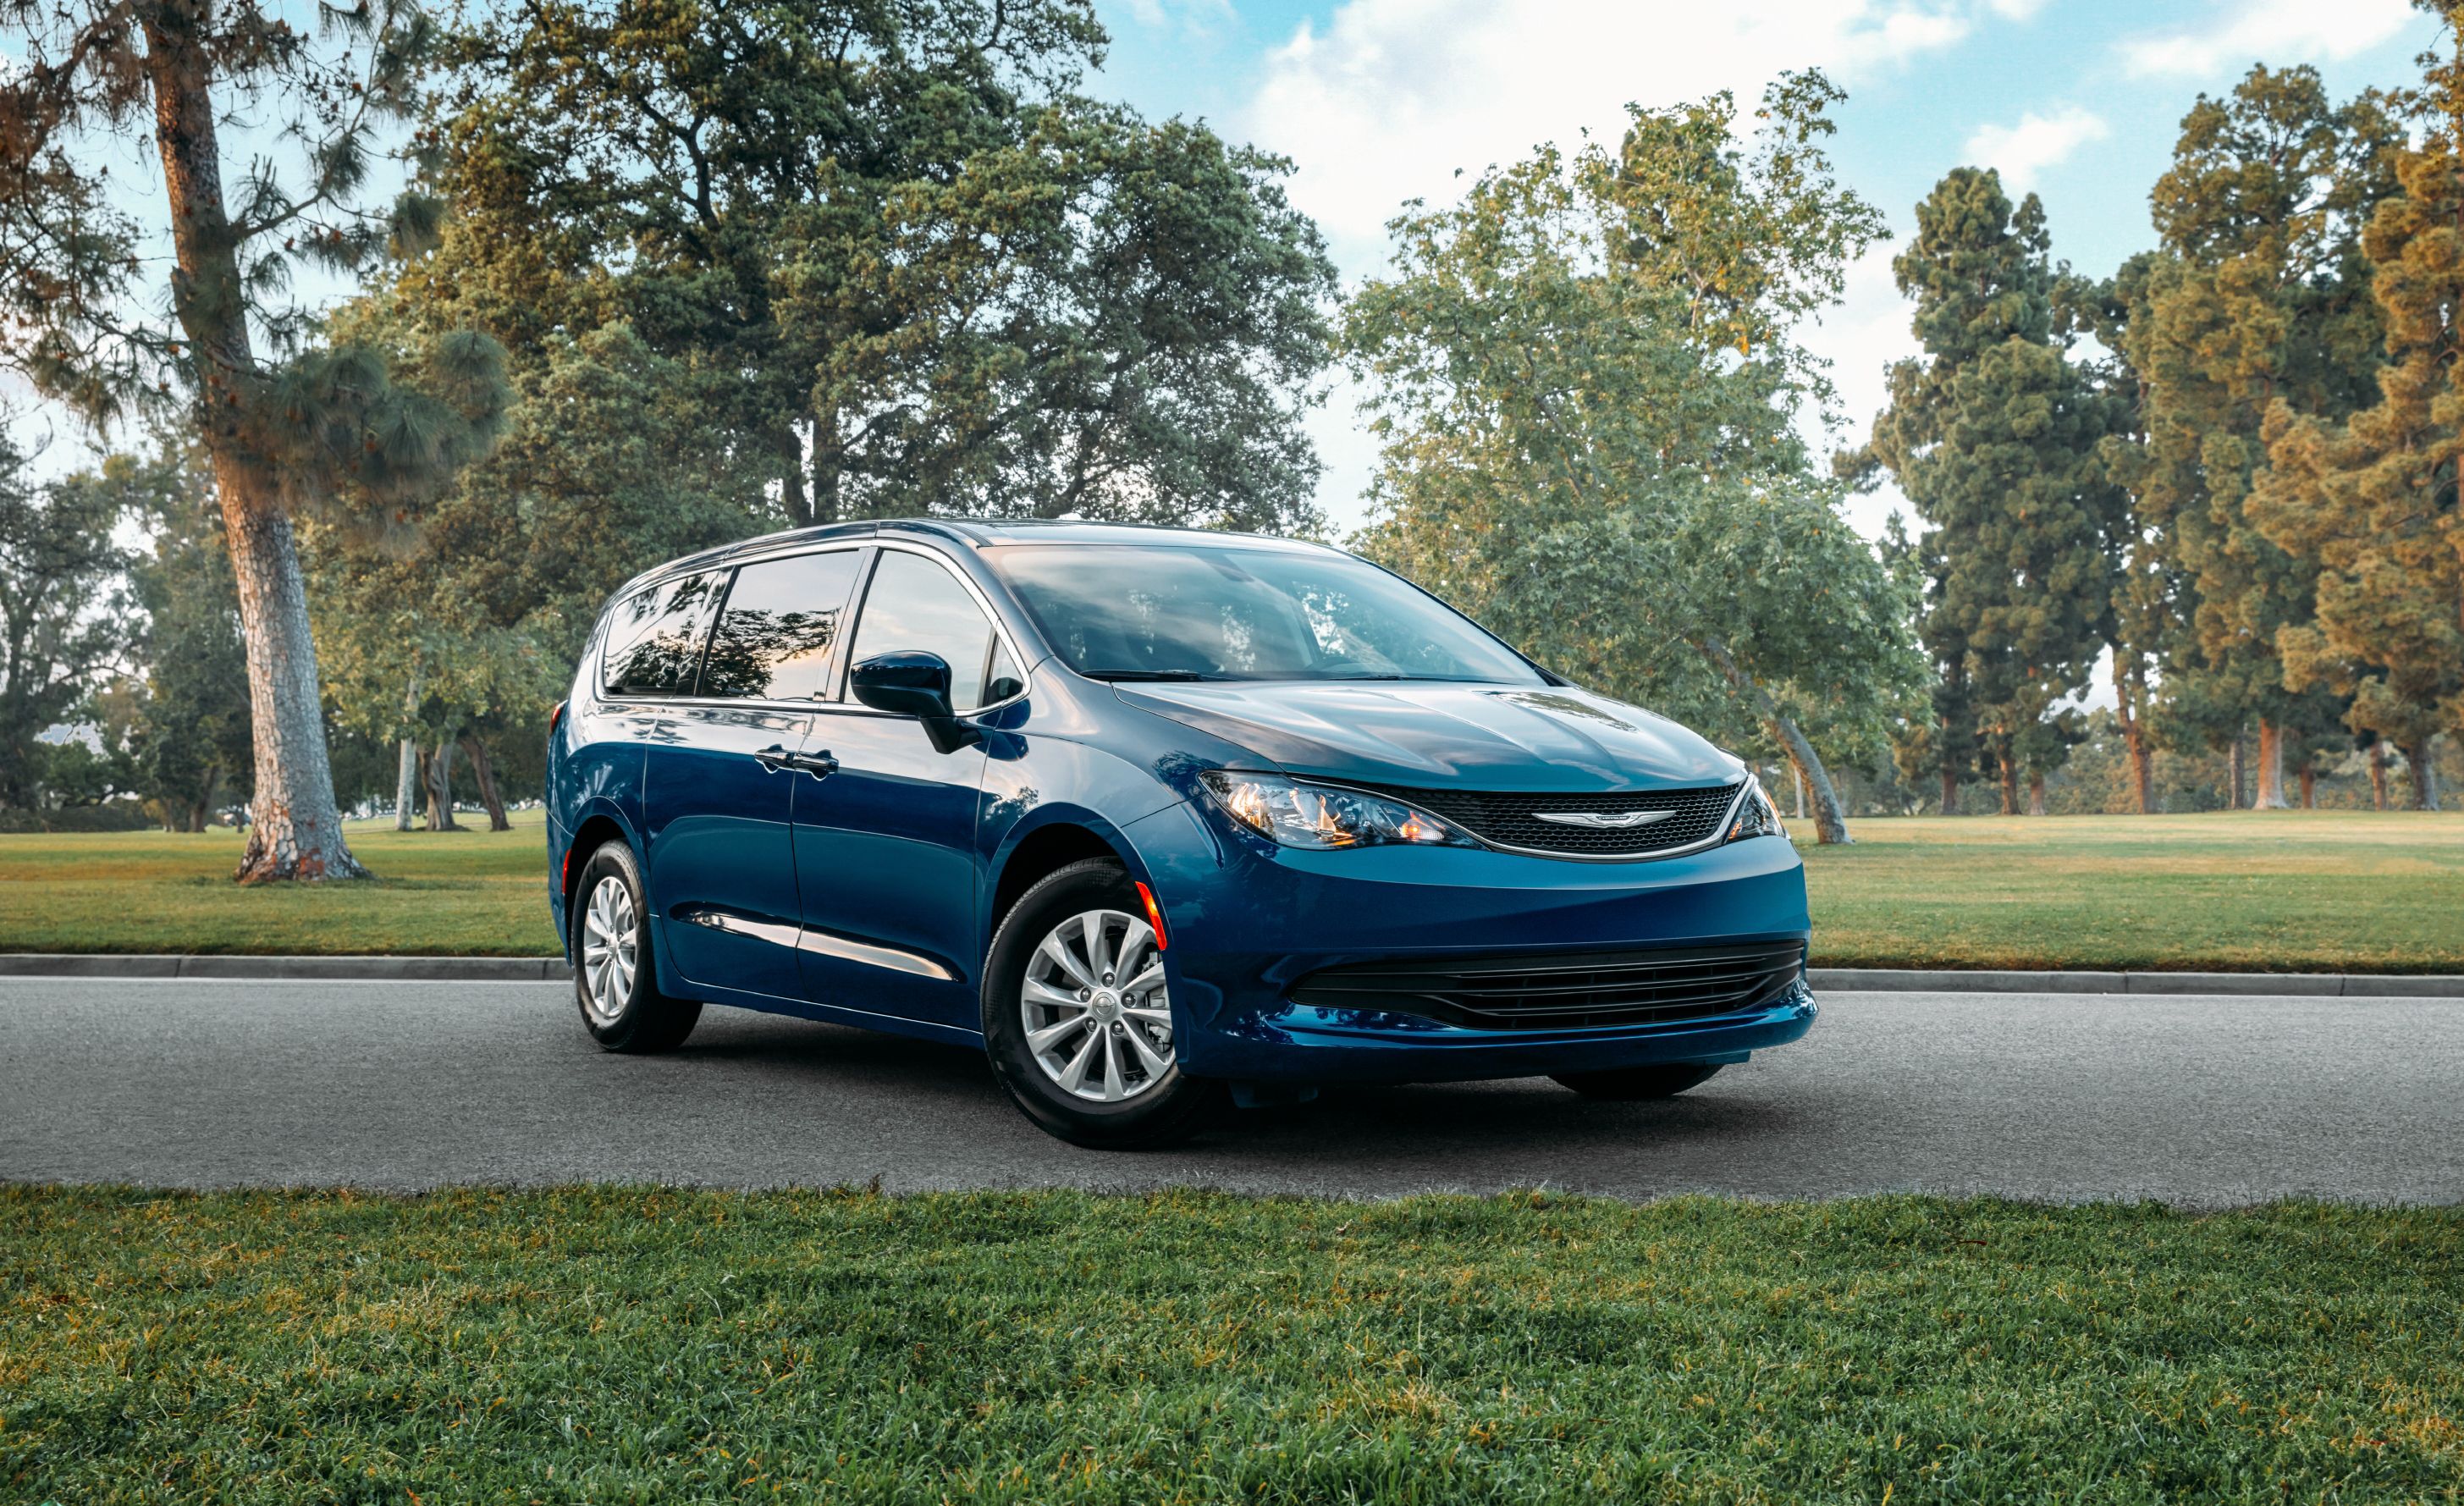 2020 Chrysler Voyager Is a Budget Pacifica